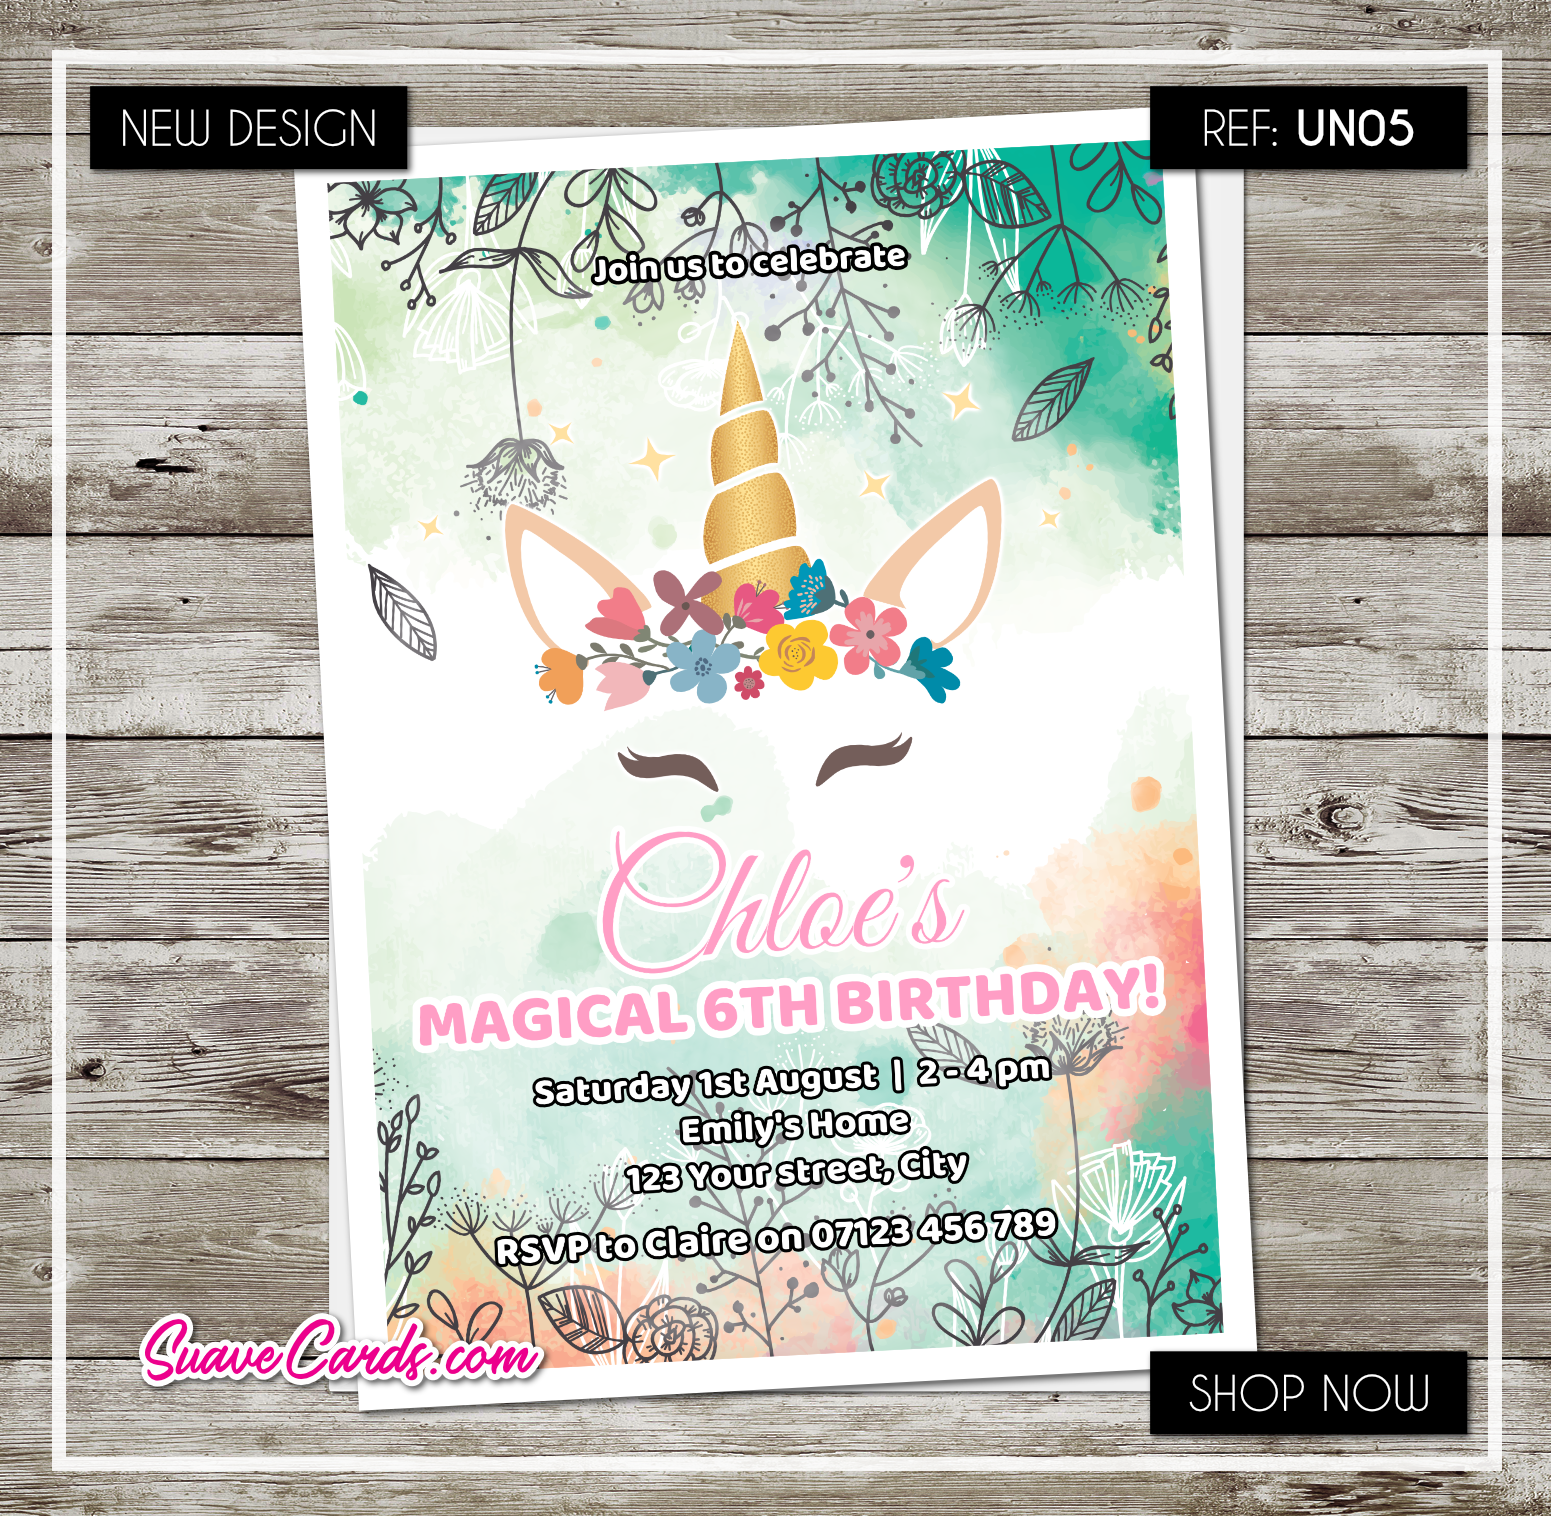 Magical Unicorn Party!